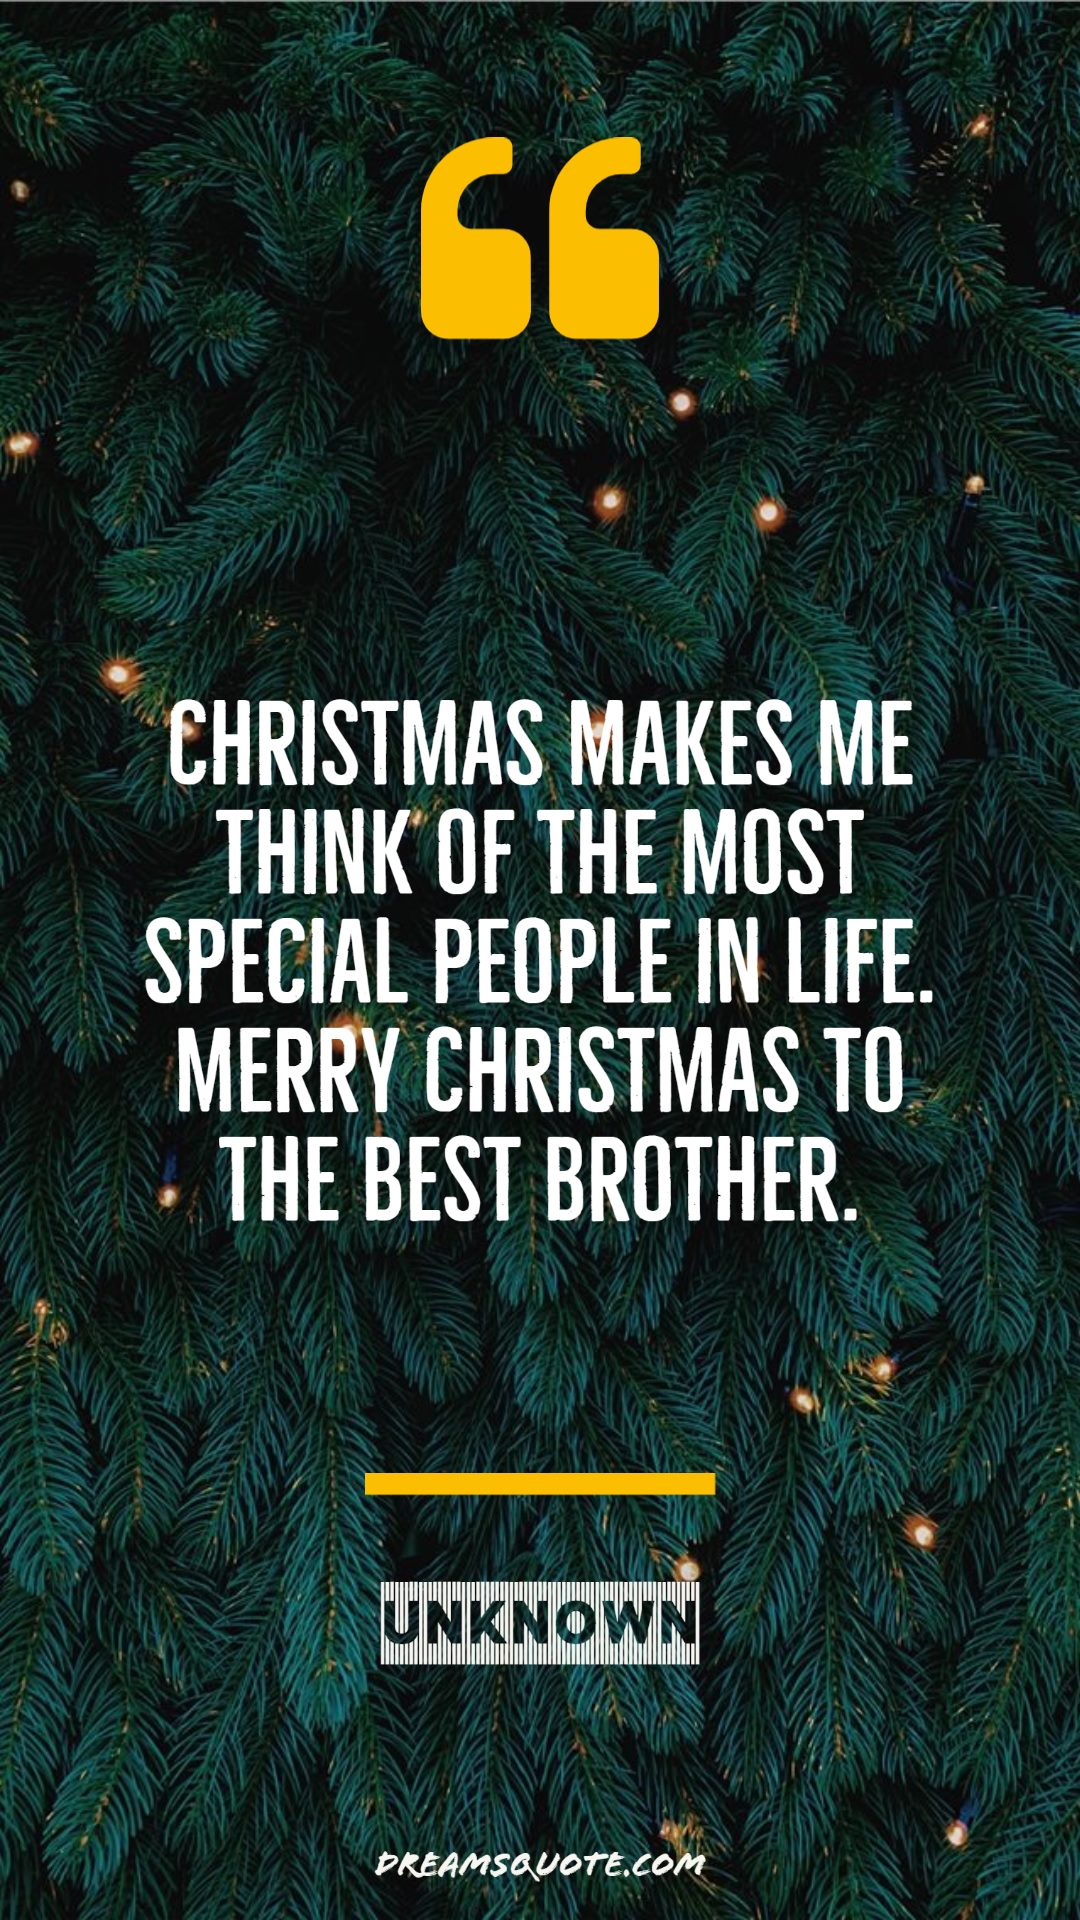 merry christmas brother gifs wishes for brother with images